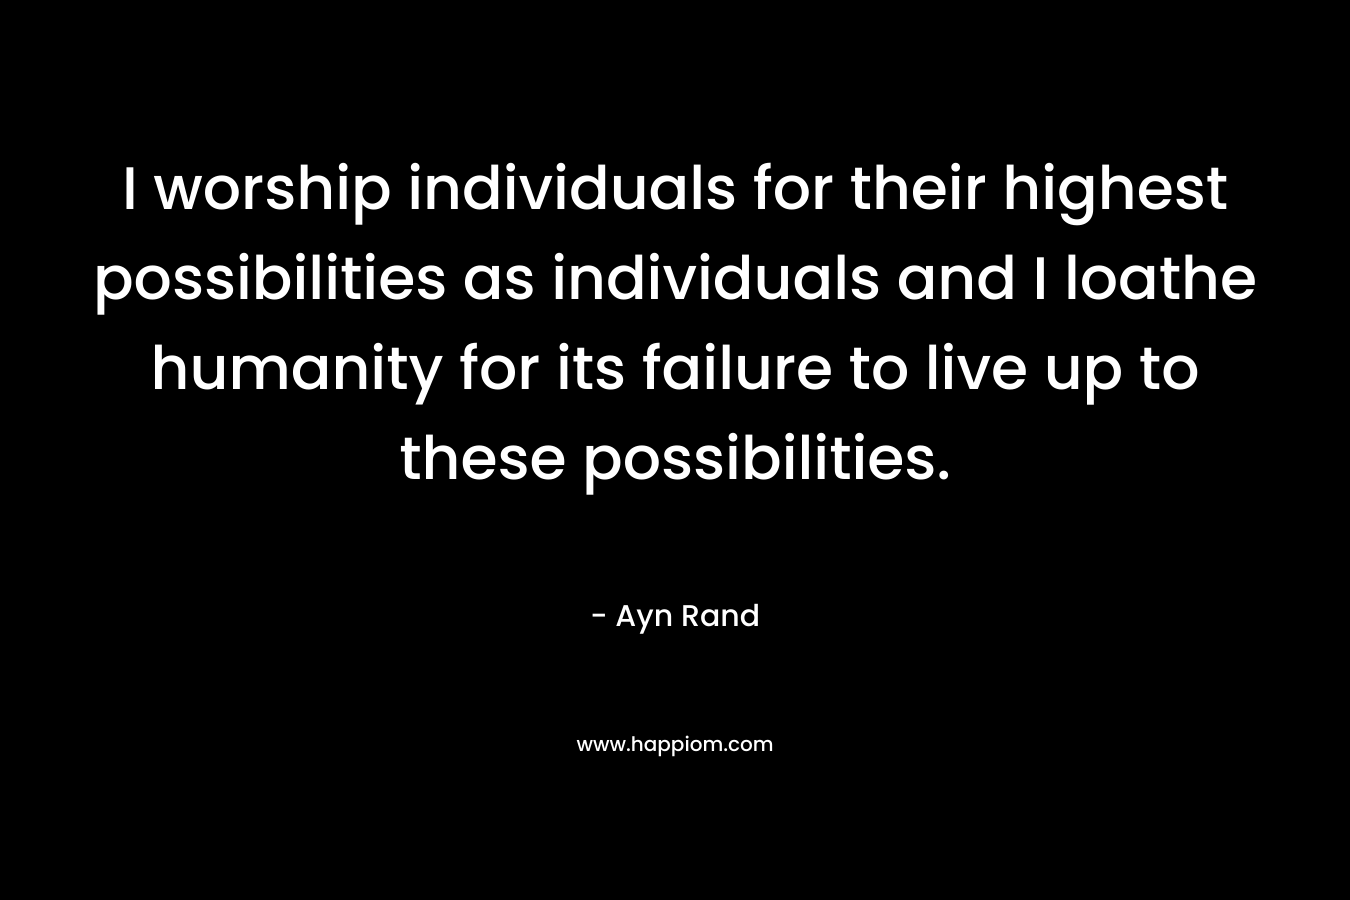 I worship individuals for their highest possibilities as individuals and I loathe humanity for its failure to live up to these possibilities. – Ayn Rand